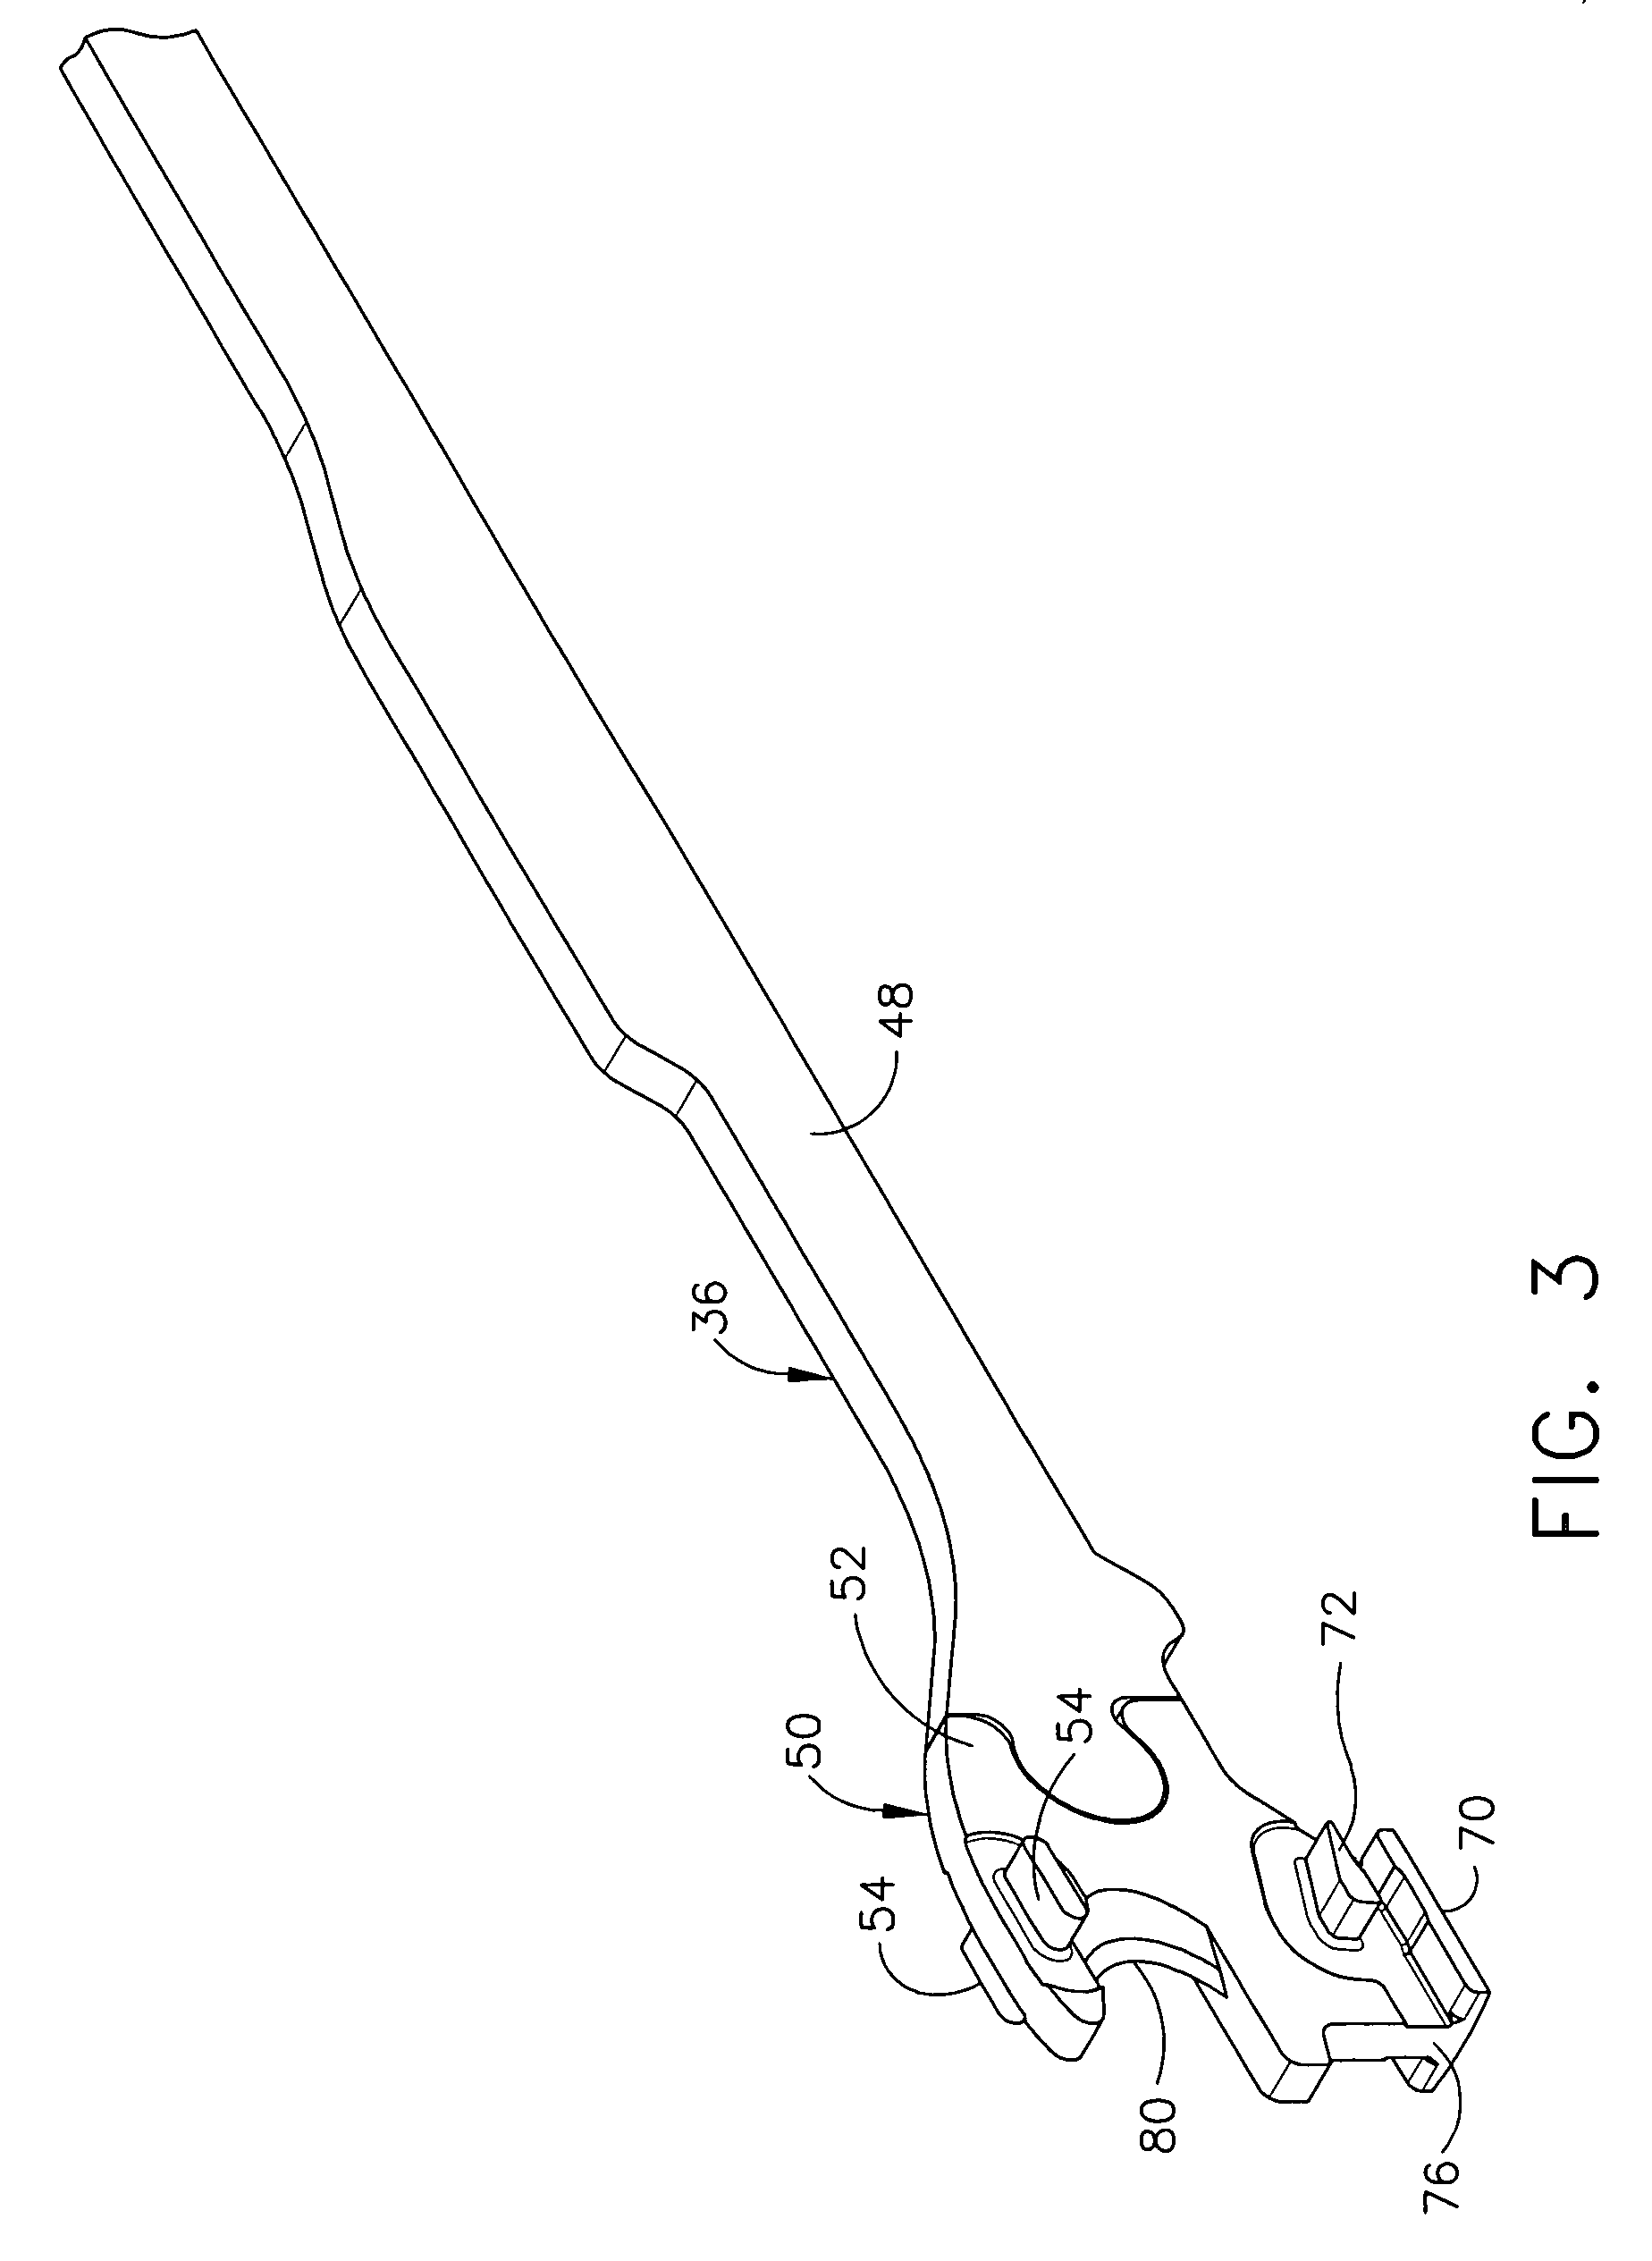 Surgical stapling instrument having force controlled spacing end effector